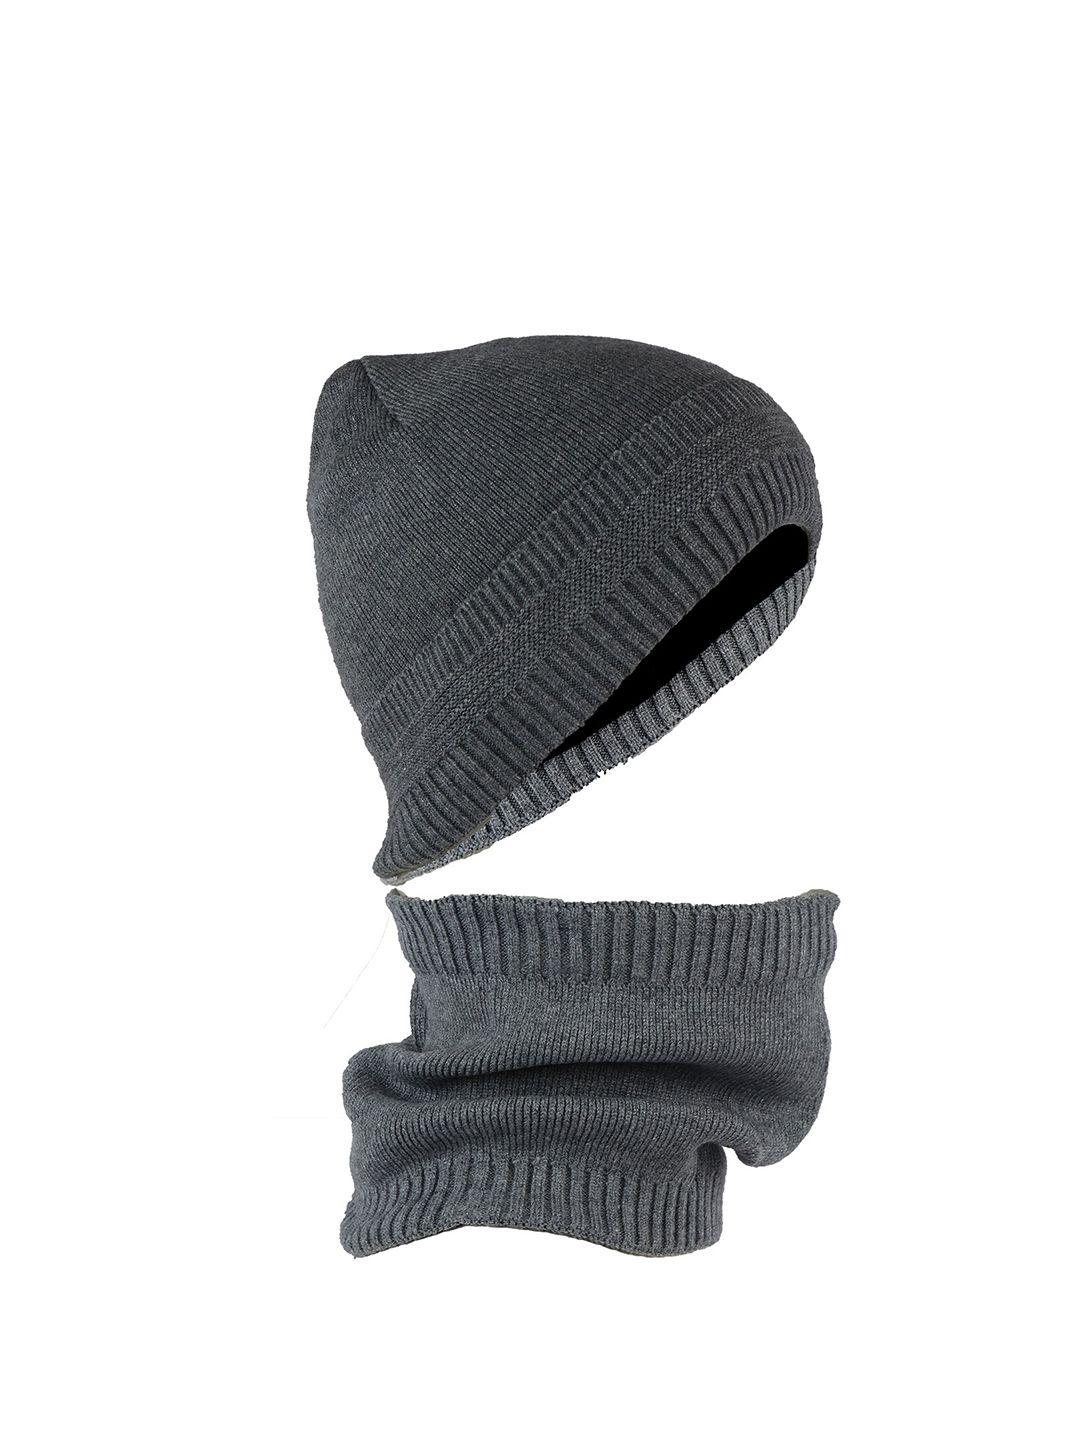 isweven-unisex-grey-beanie-with-neck-warmer-scarf